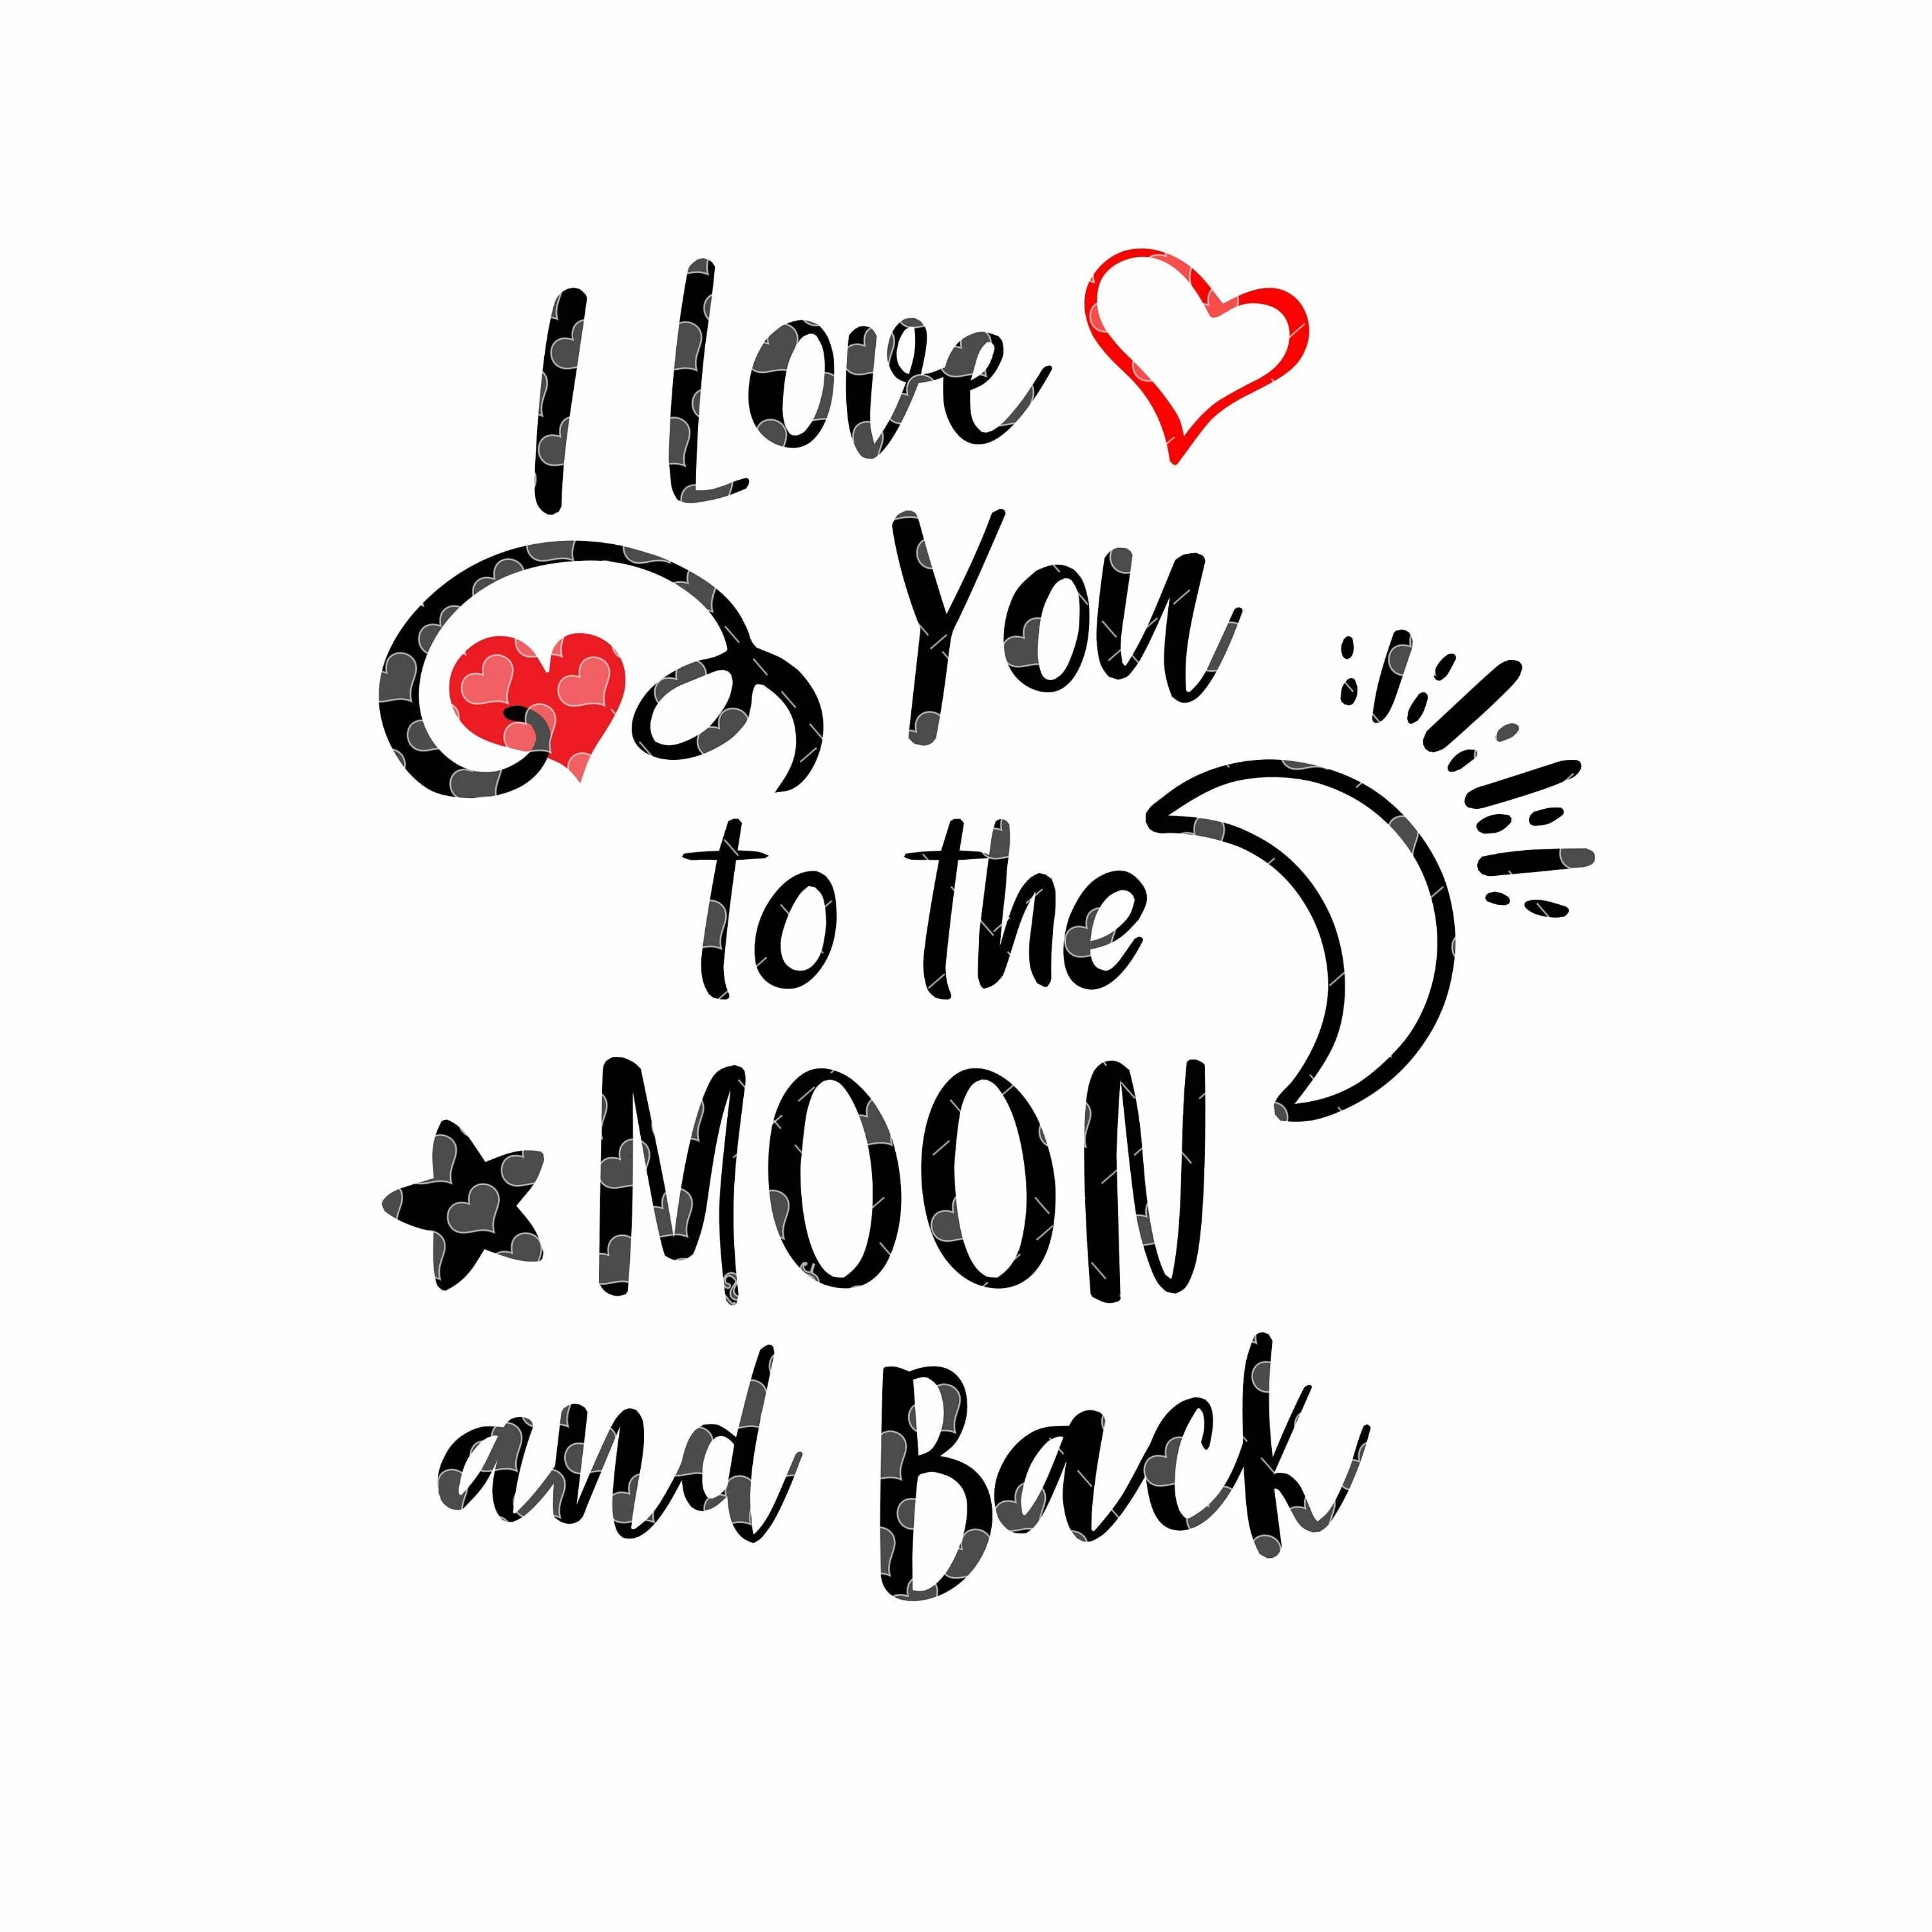 We love two. Надпись i Love you to the Moon and back. Love you to the Moon and back надпись. Тату i Love you эскиз. Love to the Moon and back.